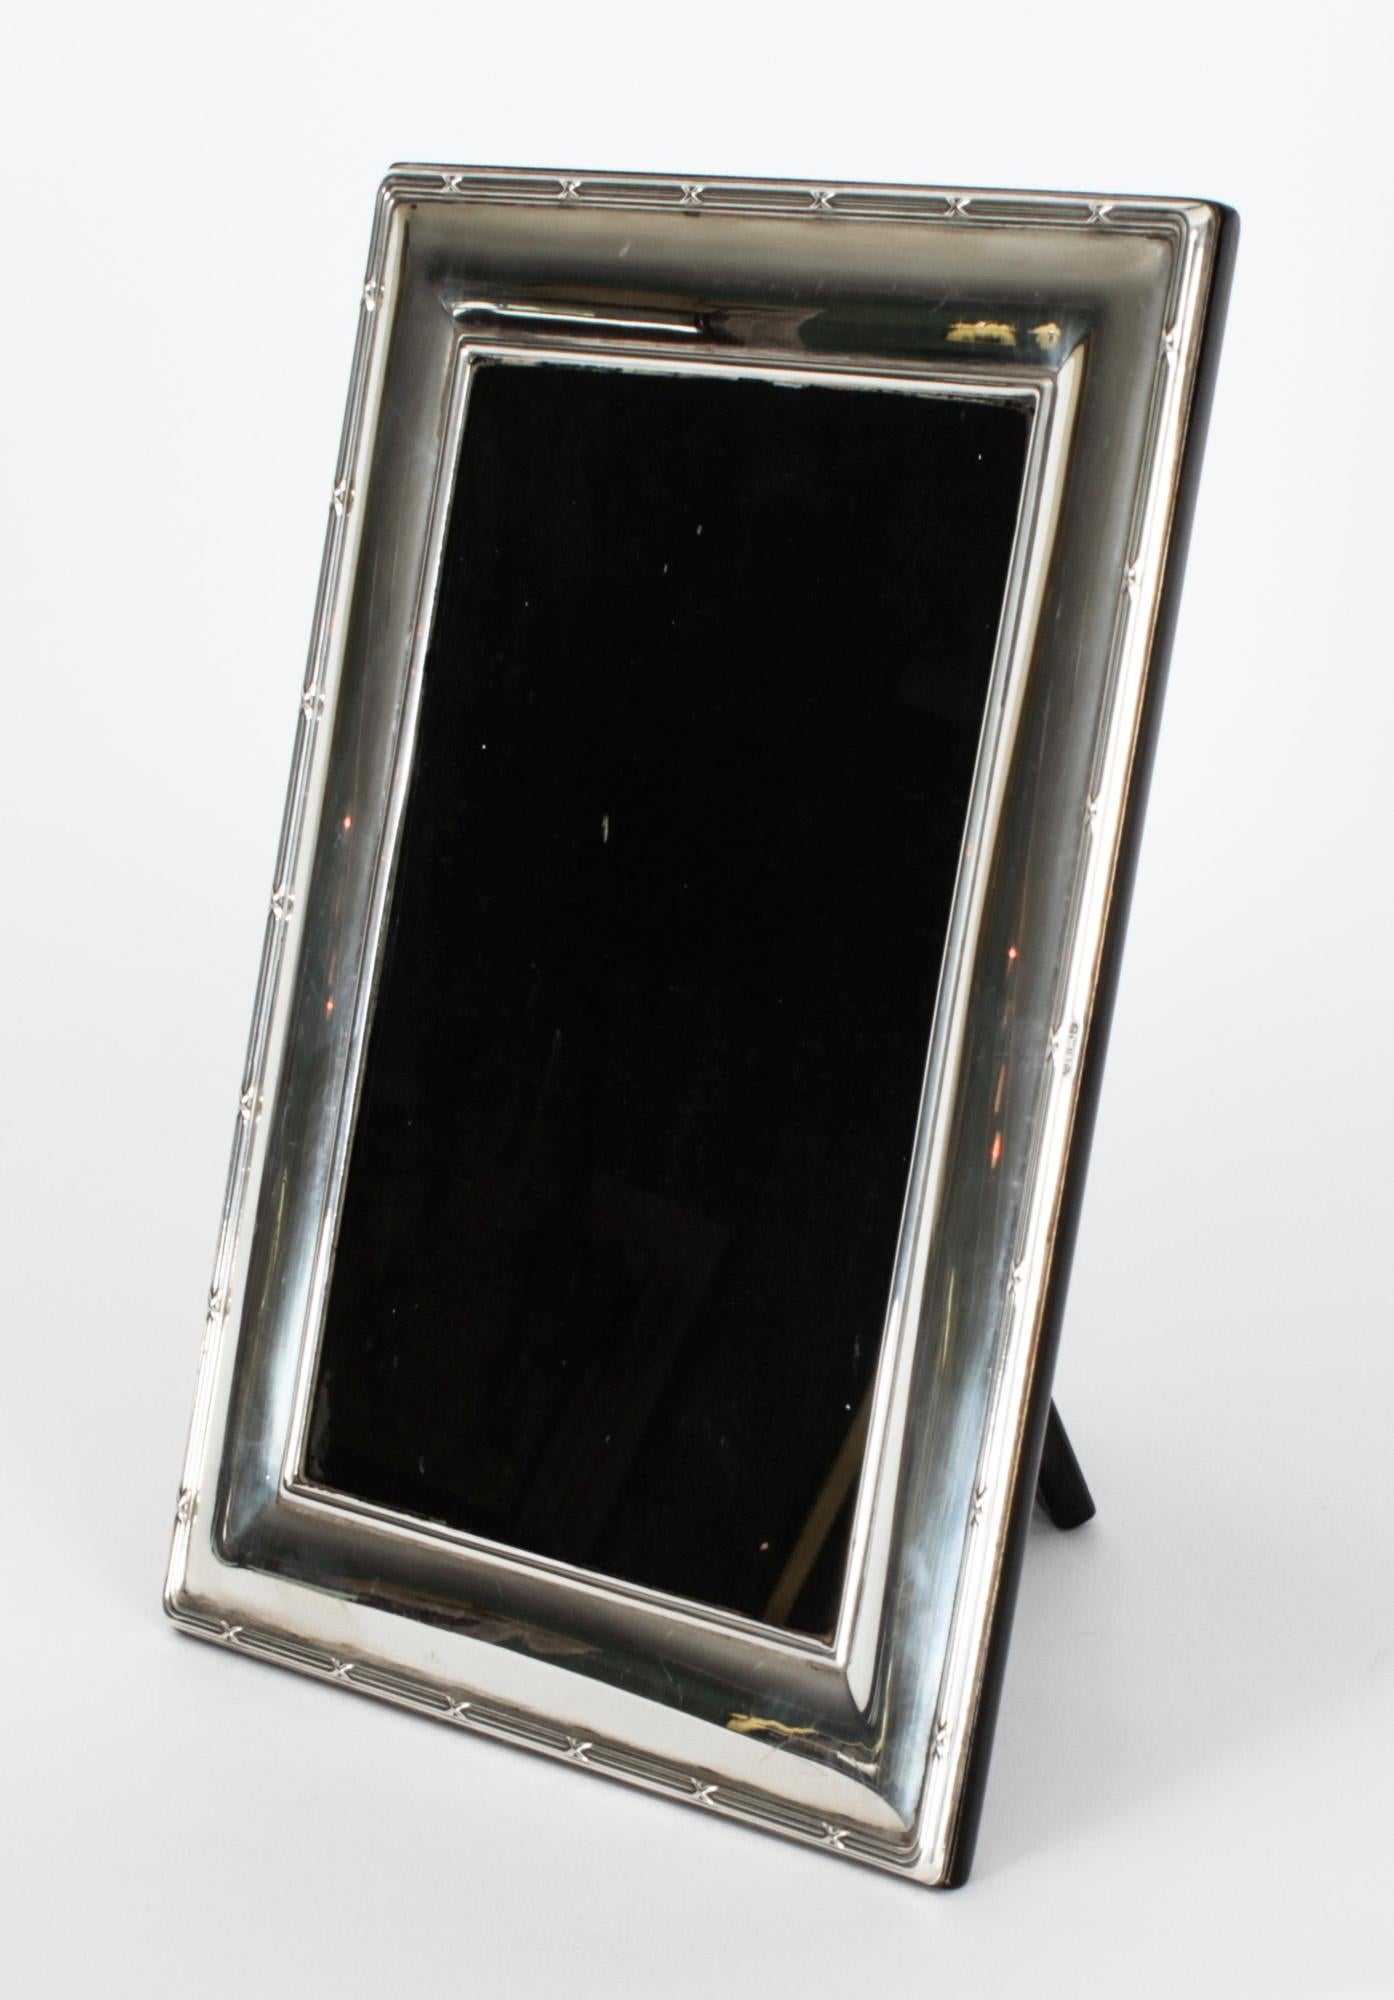 A truly superb decorative sterling silver photo frame with hall marks for Carr's of Sheffield, with the date mark for 1996.

The frame is beautifully decorated with reed and stitchborders and can be used landscape or portrait.

An excellent gift